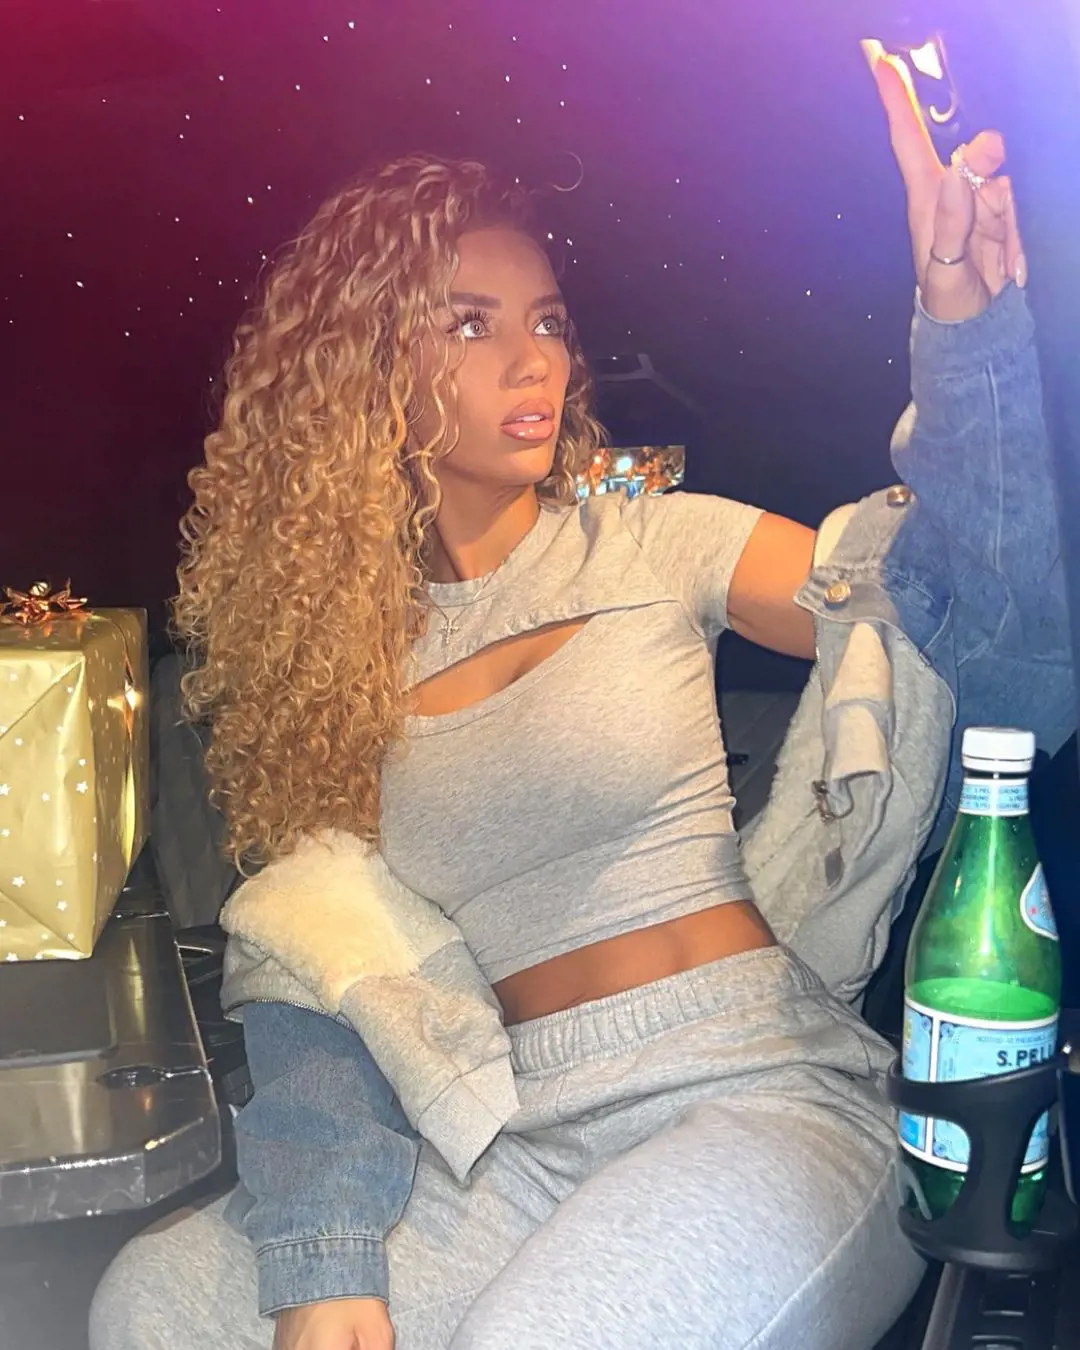 Jena Frumes on her England tour in December 2022, sitting in a car on the streets of Manchester. Silk Executive Travel arranged all her travel to UK